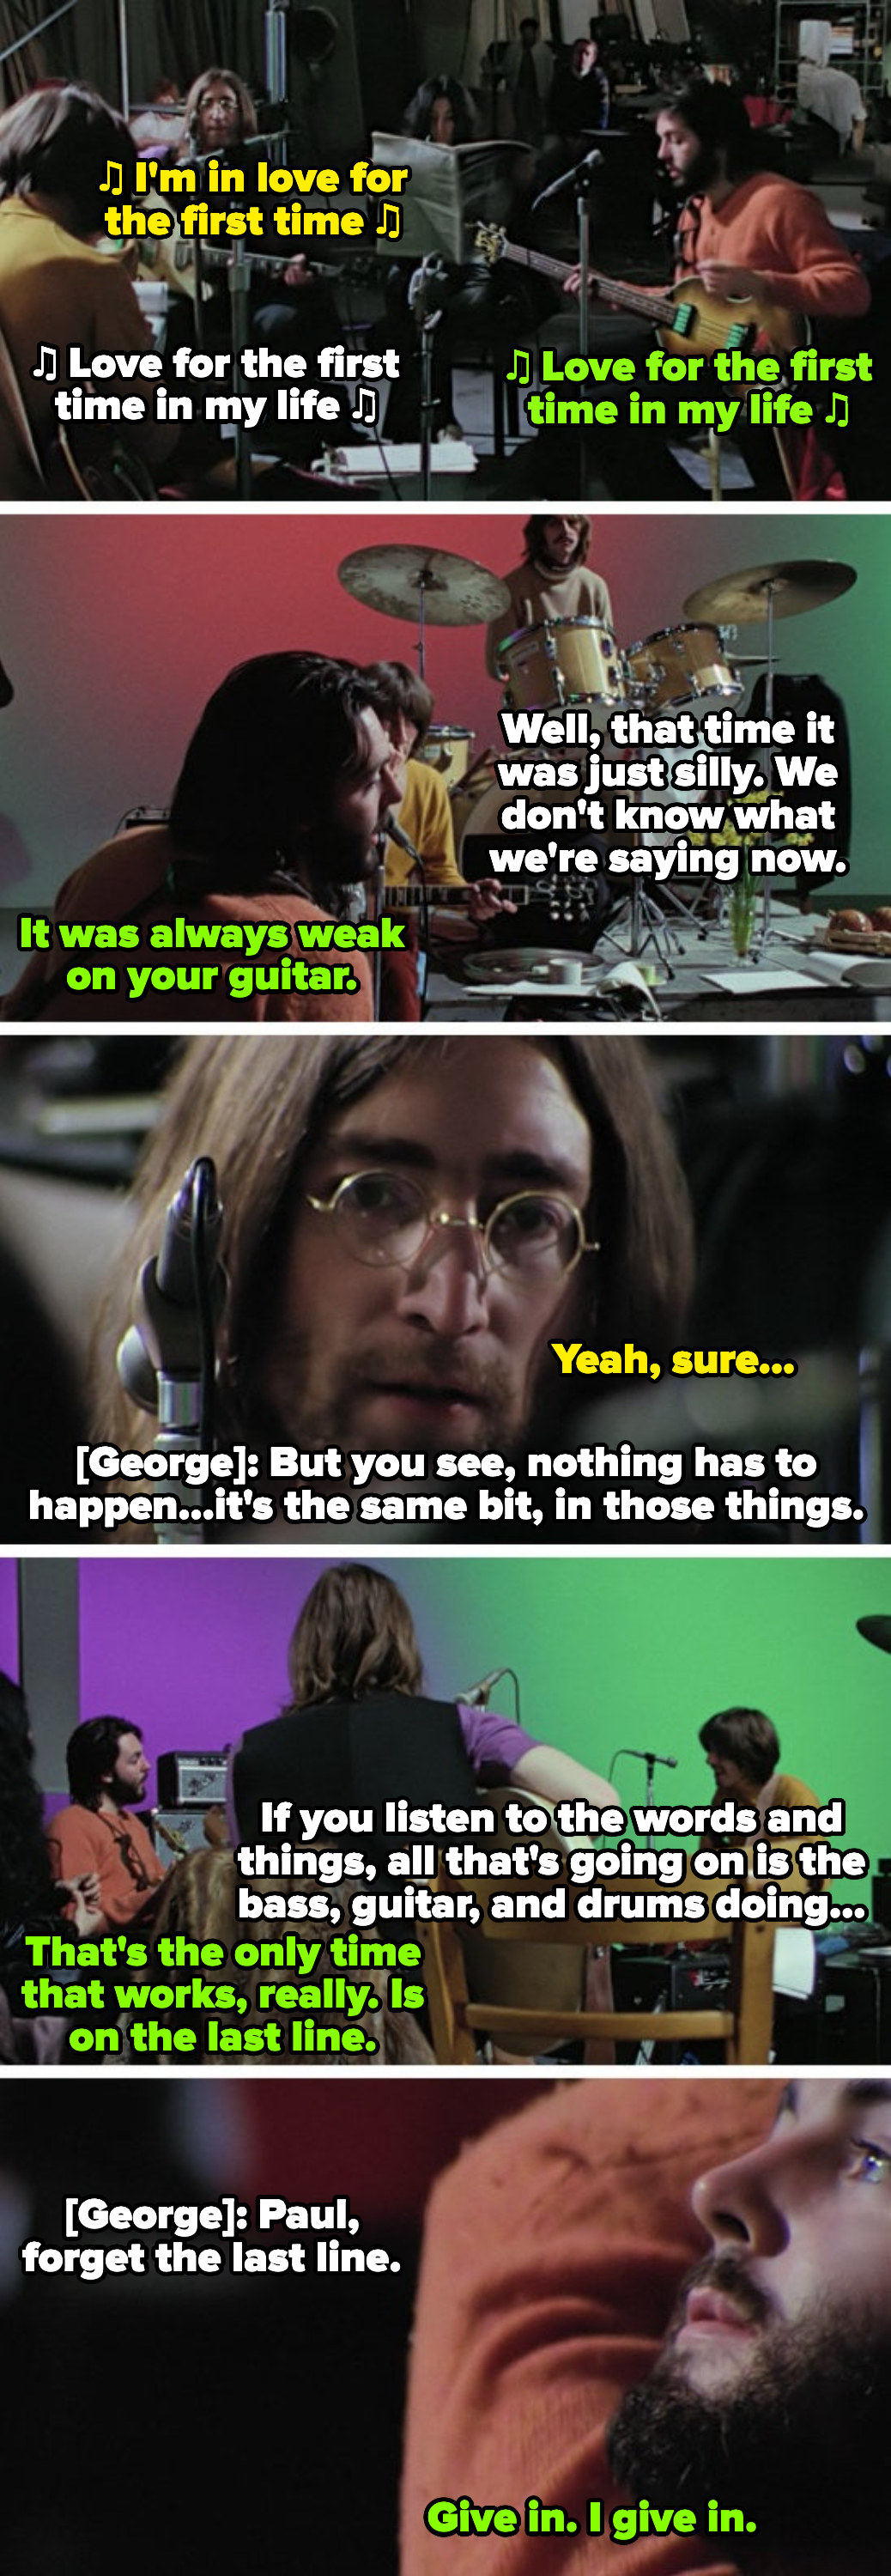 Paul to John: &quot;It was always weak on your guitar&quot; John to Paul: &quot;Yeah, sure...&quot; George to Paul: &quot;If you listen to the words, all that&#x27;s going on is the bass, guitar, and drums doing...&quot; Paul to George: &quot;Give in. I give in&quot;